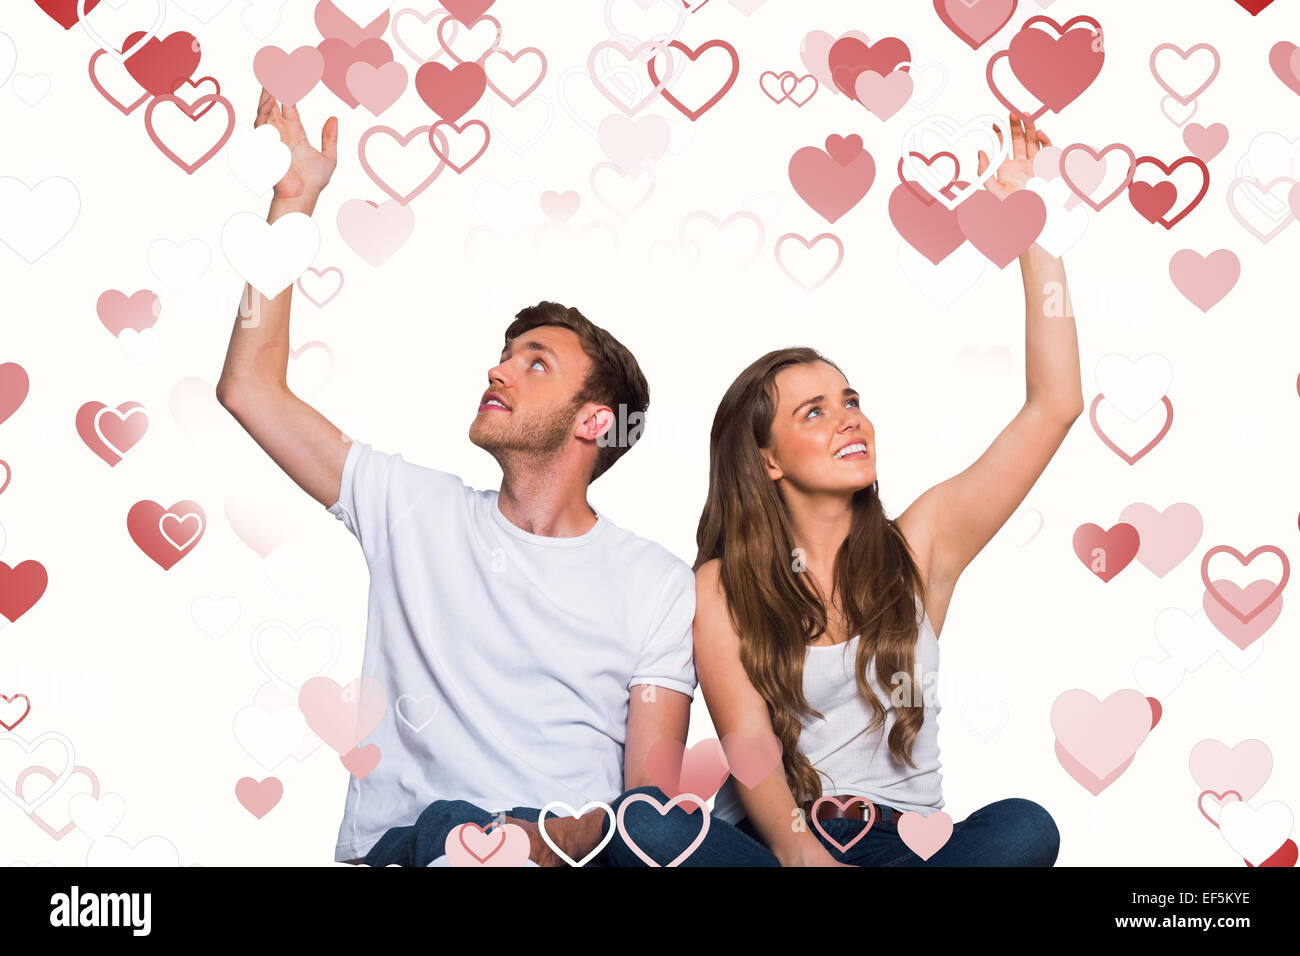 Composite image of happy young couple with hands raised Stock Photo